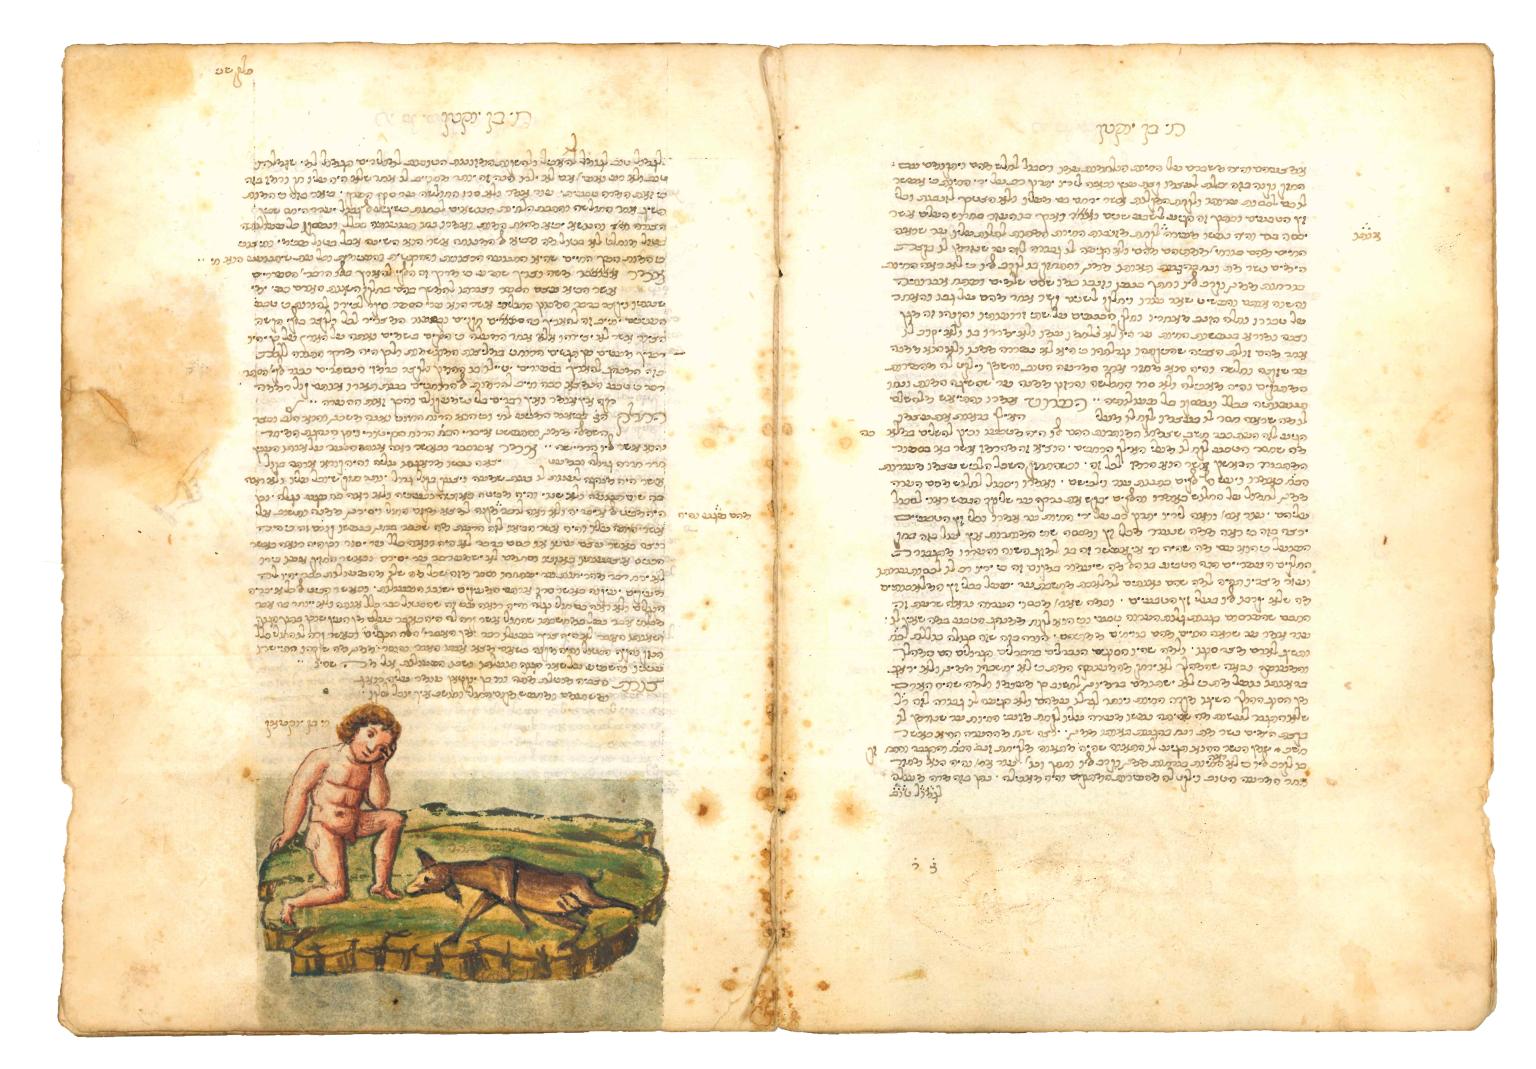 Facing-page manuscript with Hebrew text and an illustration of a naked boy sitting next to a deer on bottom margin of left-hand page. 